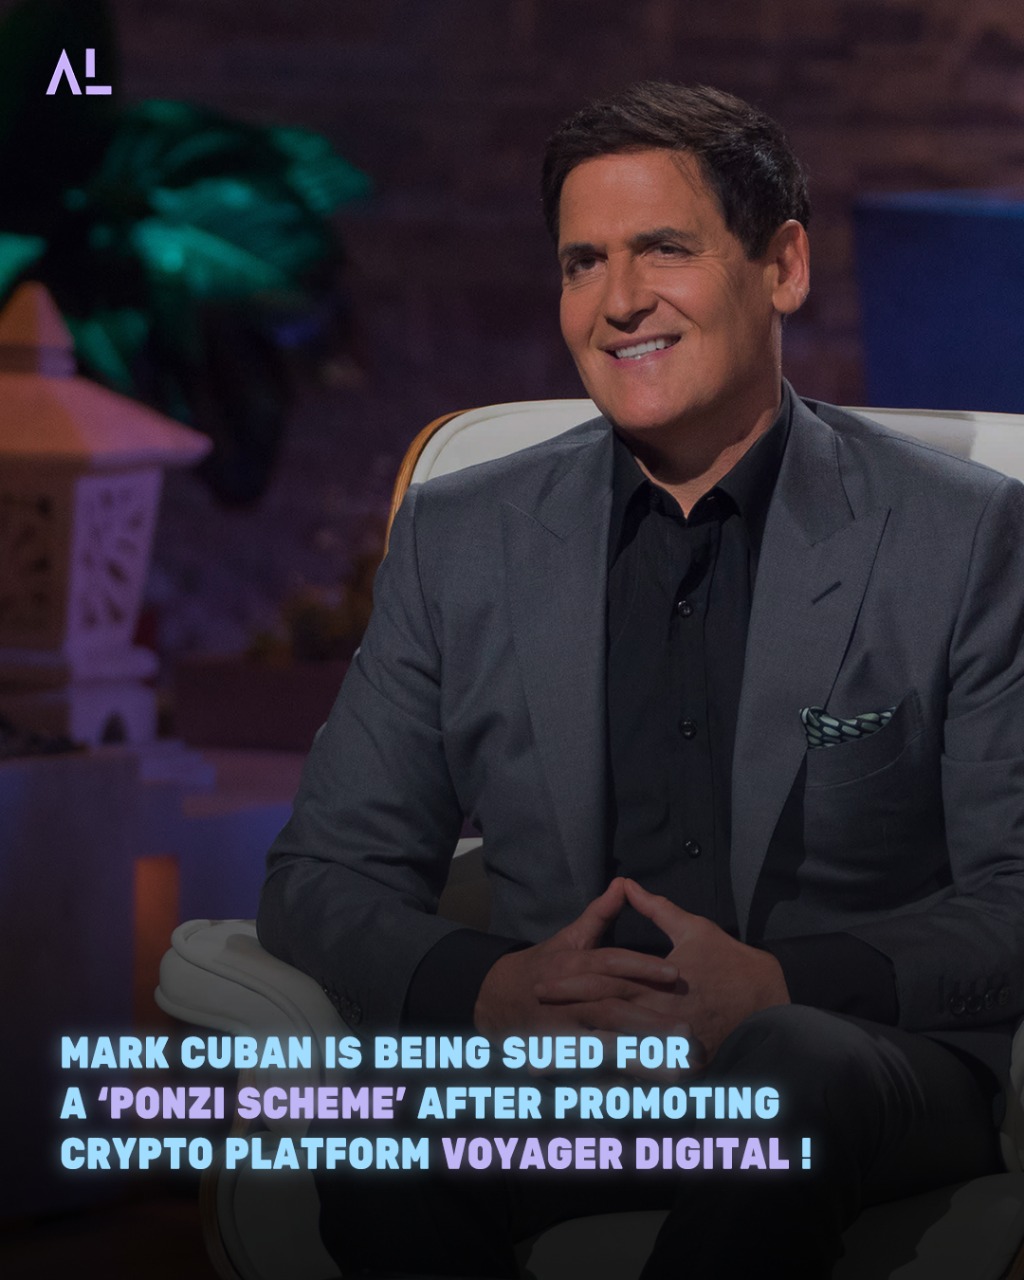 Mark Cuban Is Facing A Lawsuit For Promoting Voyager Digital!